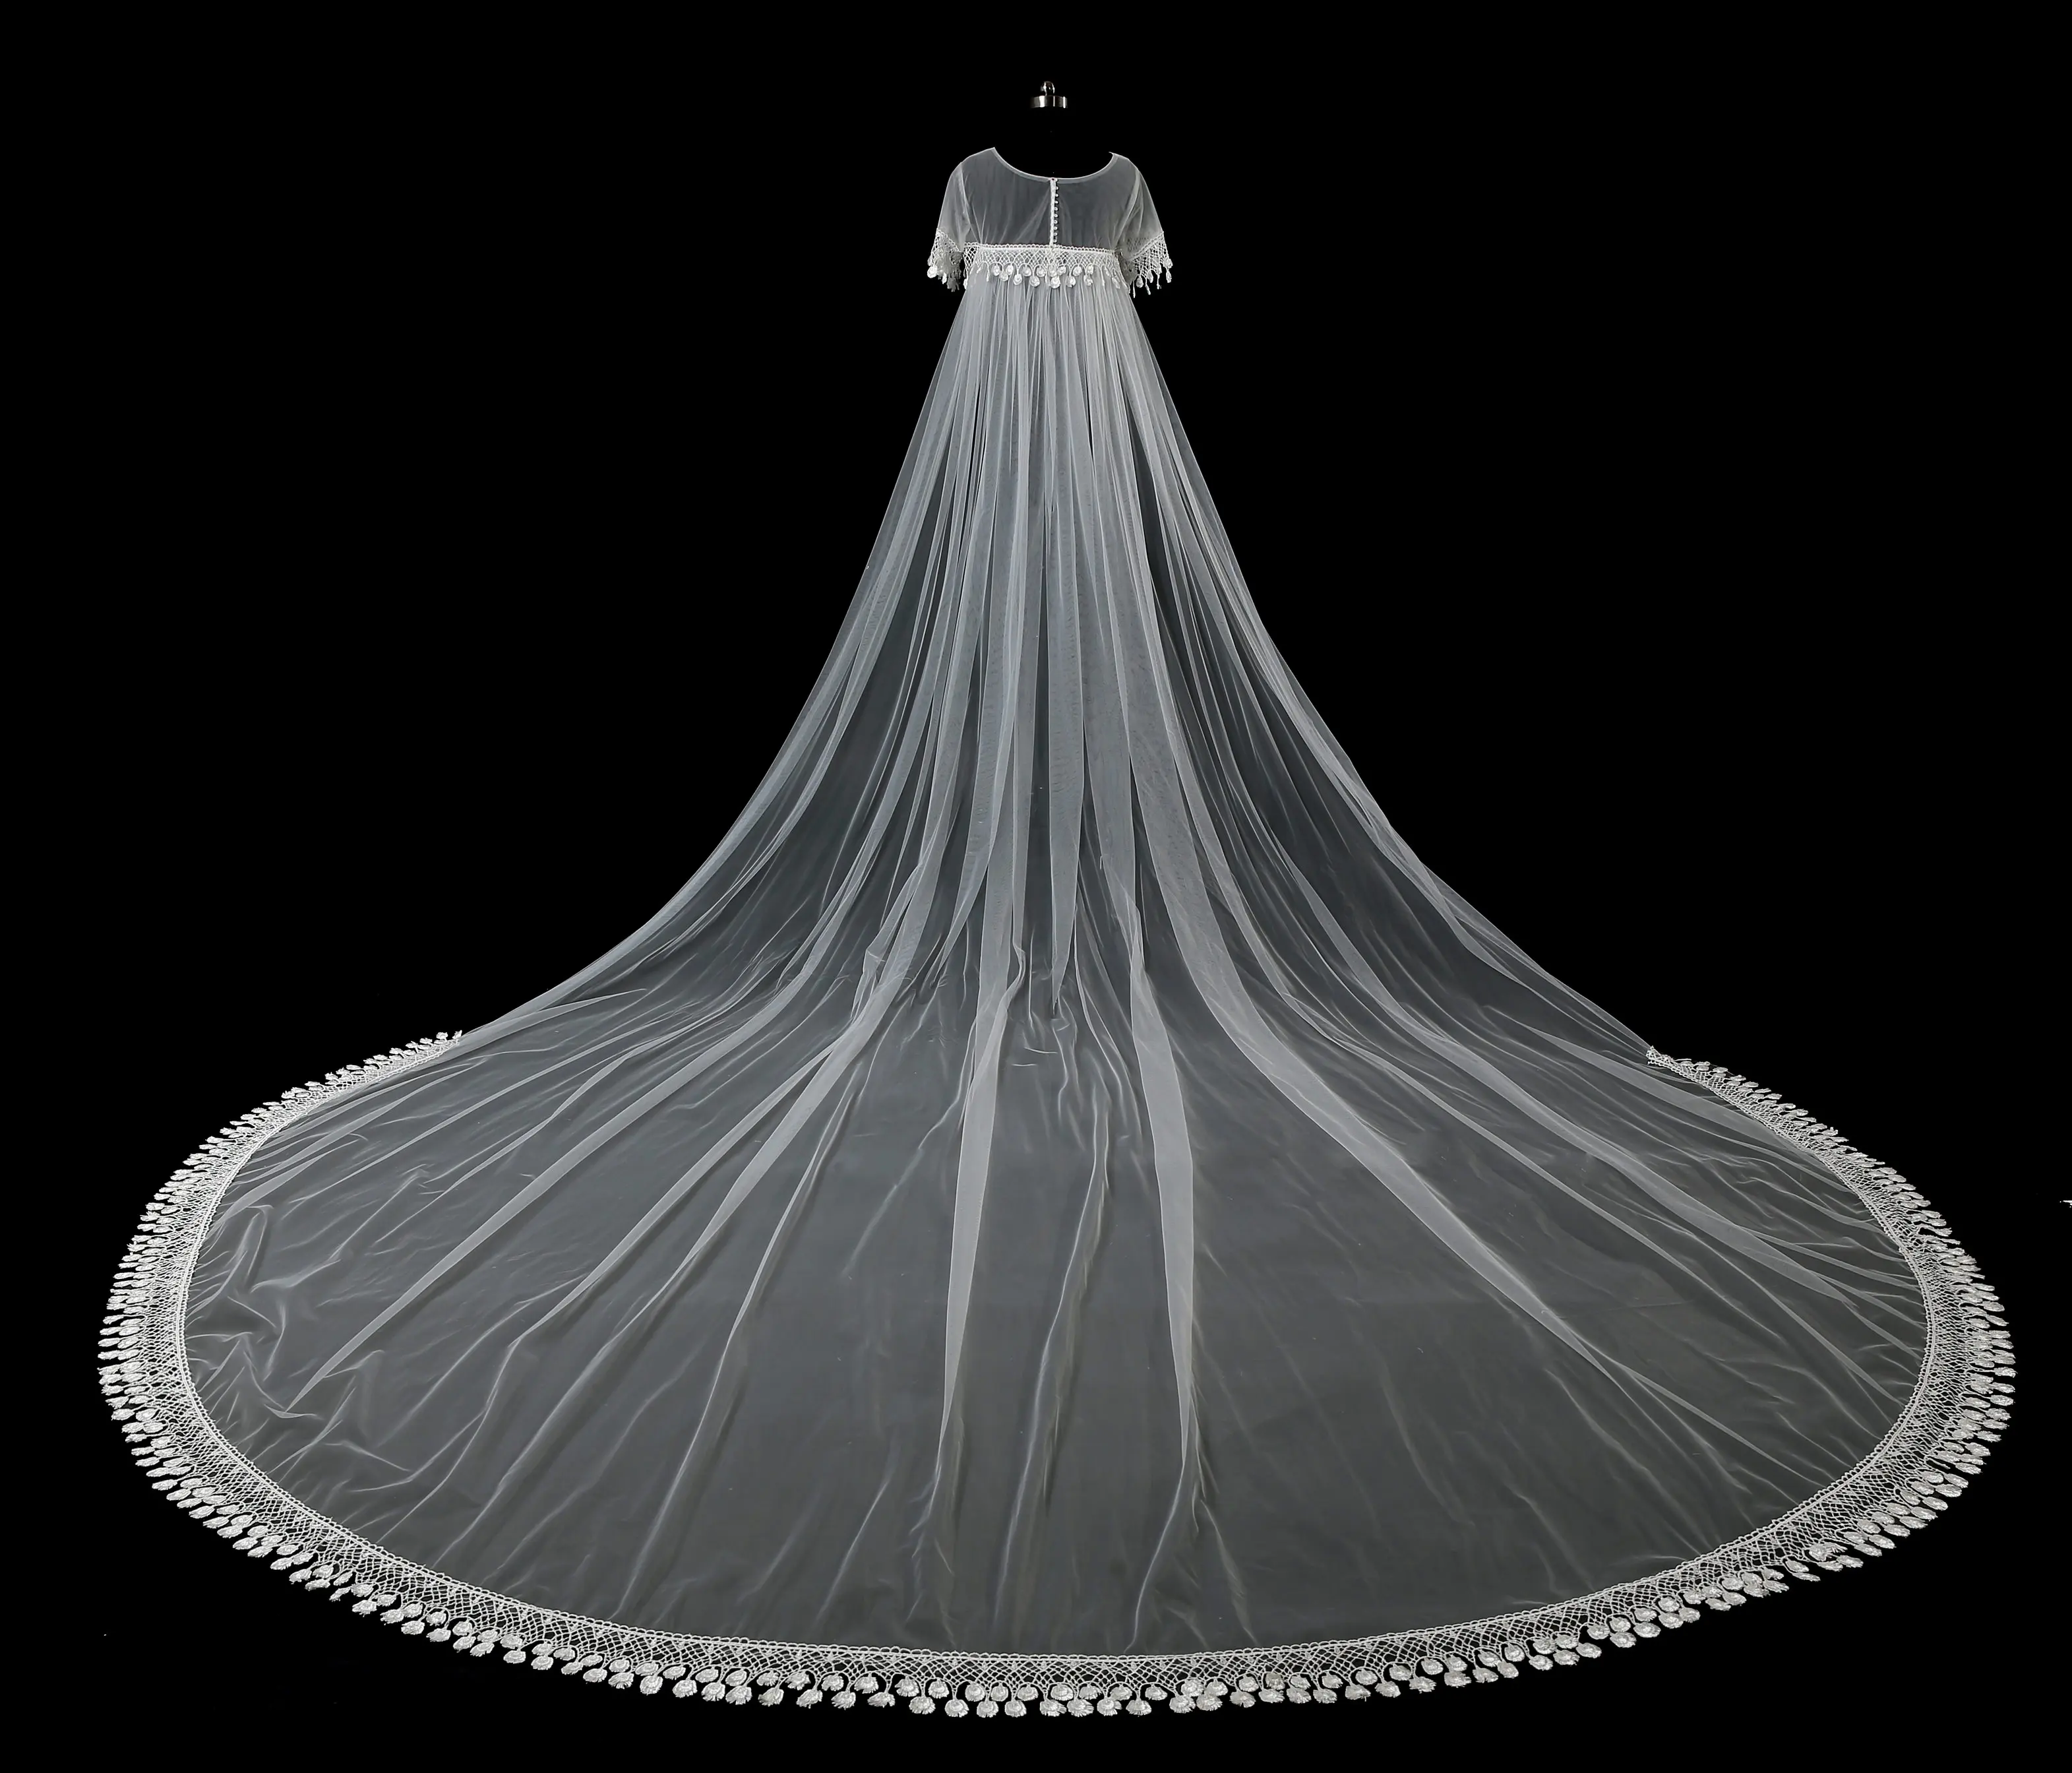 2020 White Wedding Veil 3 Meters Long Comb Lace Mantilla Cathedral Bridal Veils Wedding Accessories in Stock